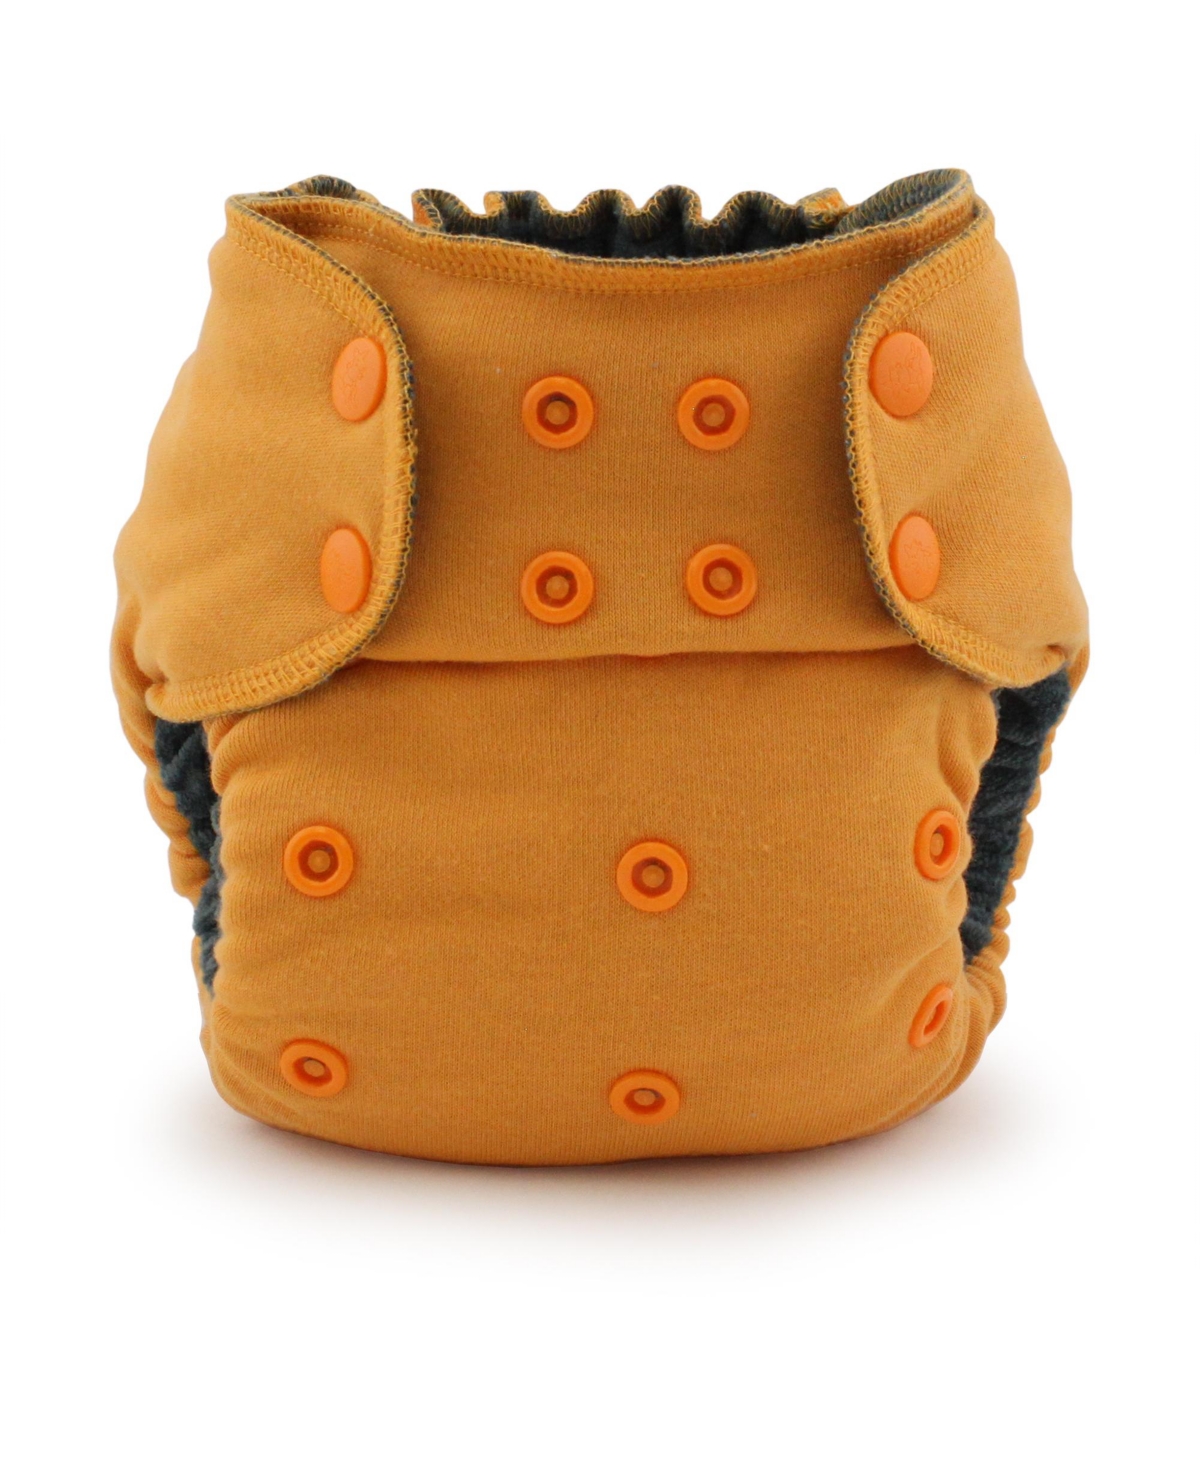 Kanga Care Babies' Ecoposh Obv (organic Rayon From Bamboo Velour) One Size Adjustable Pocket Fitted Cloth Diaper In Saffron